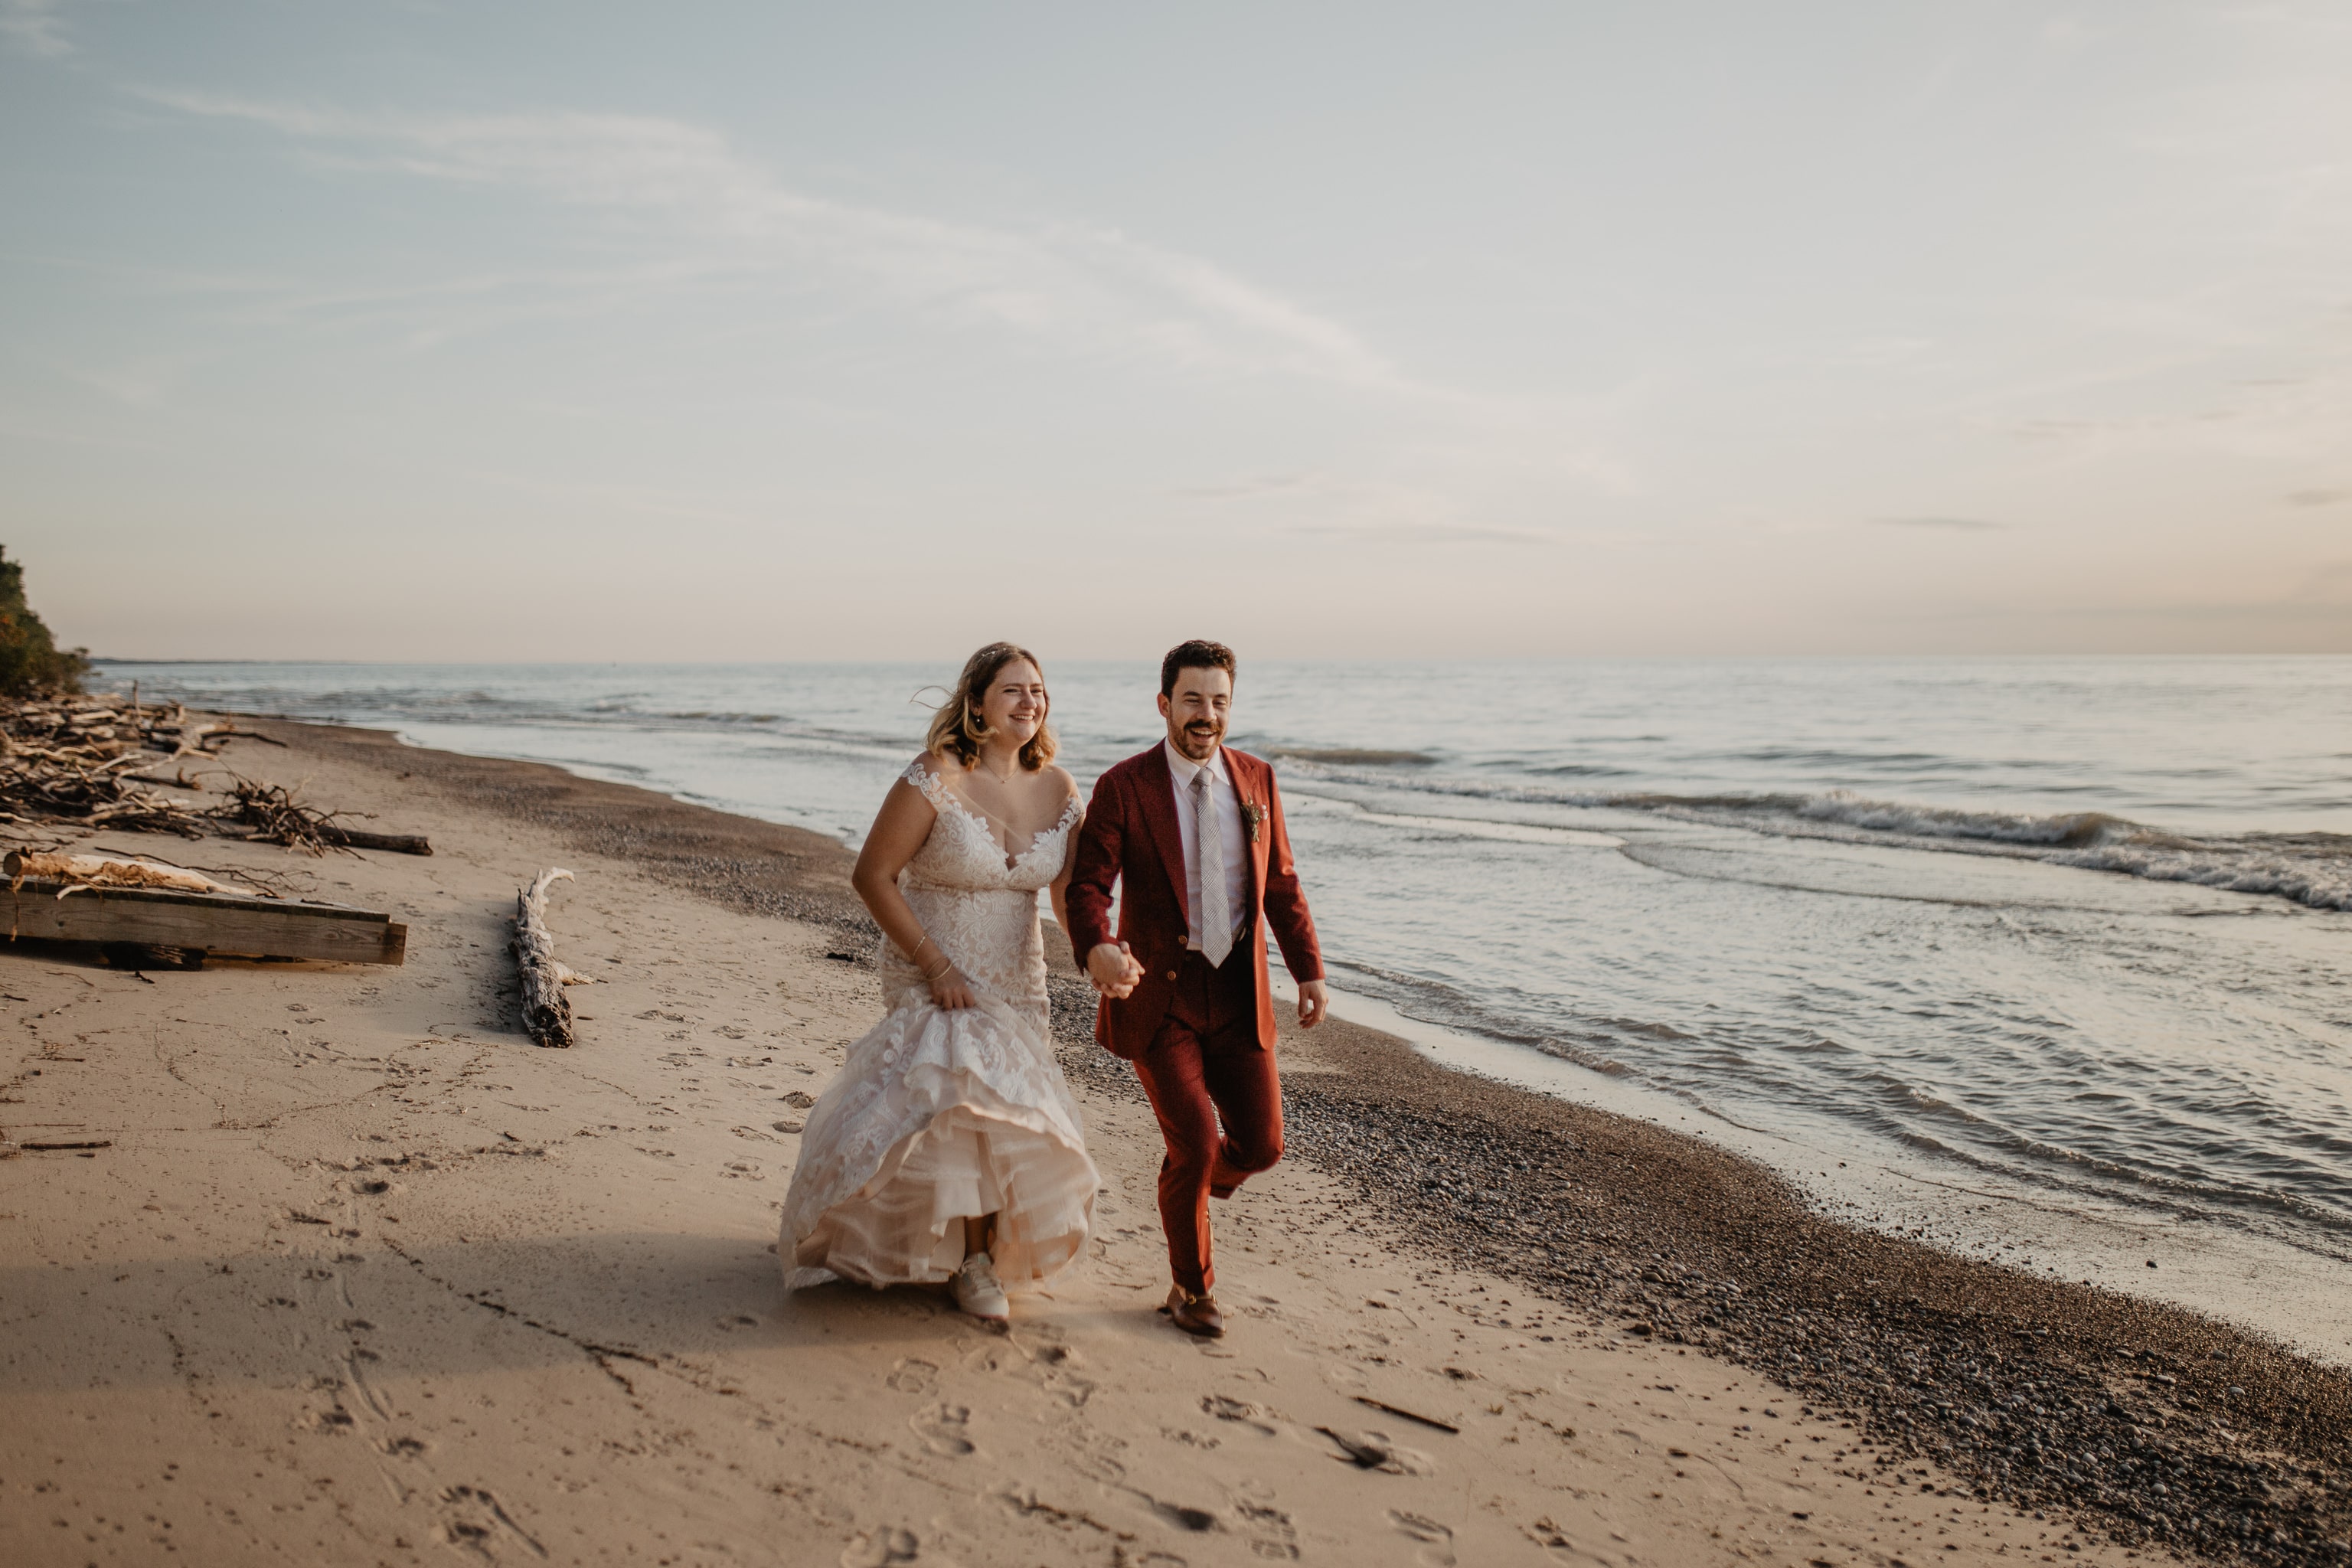 Bride and groom running on beach at sunset